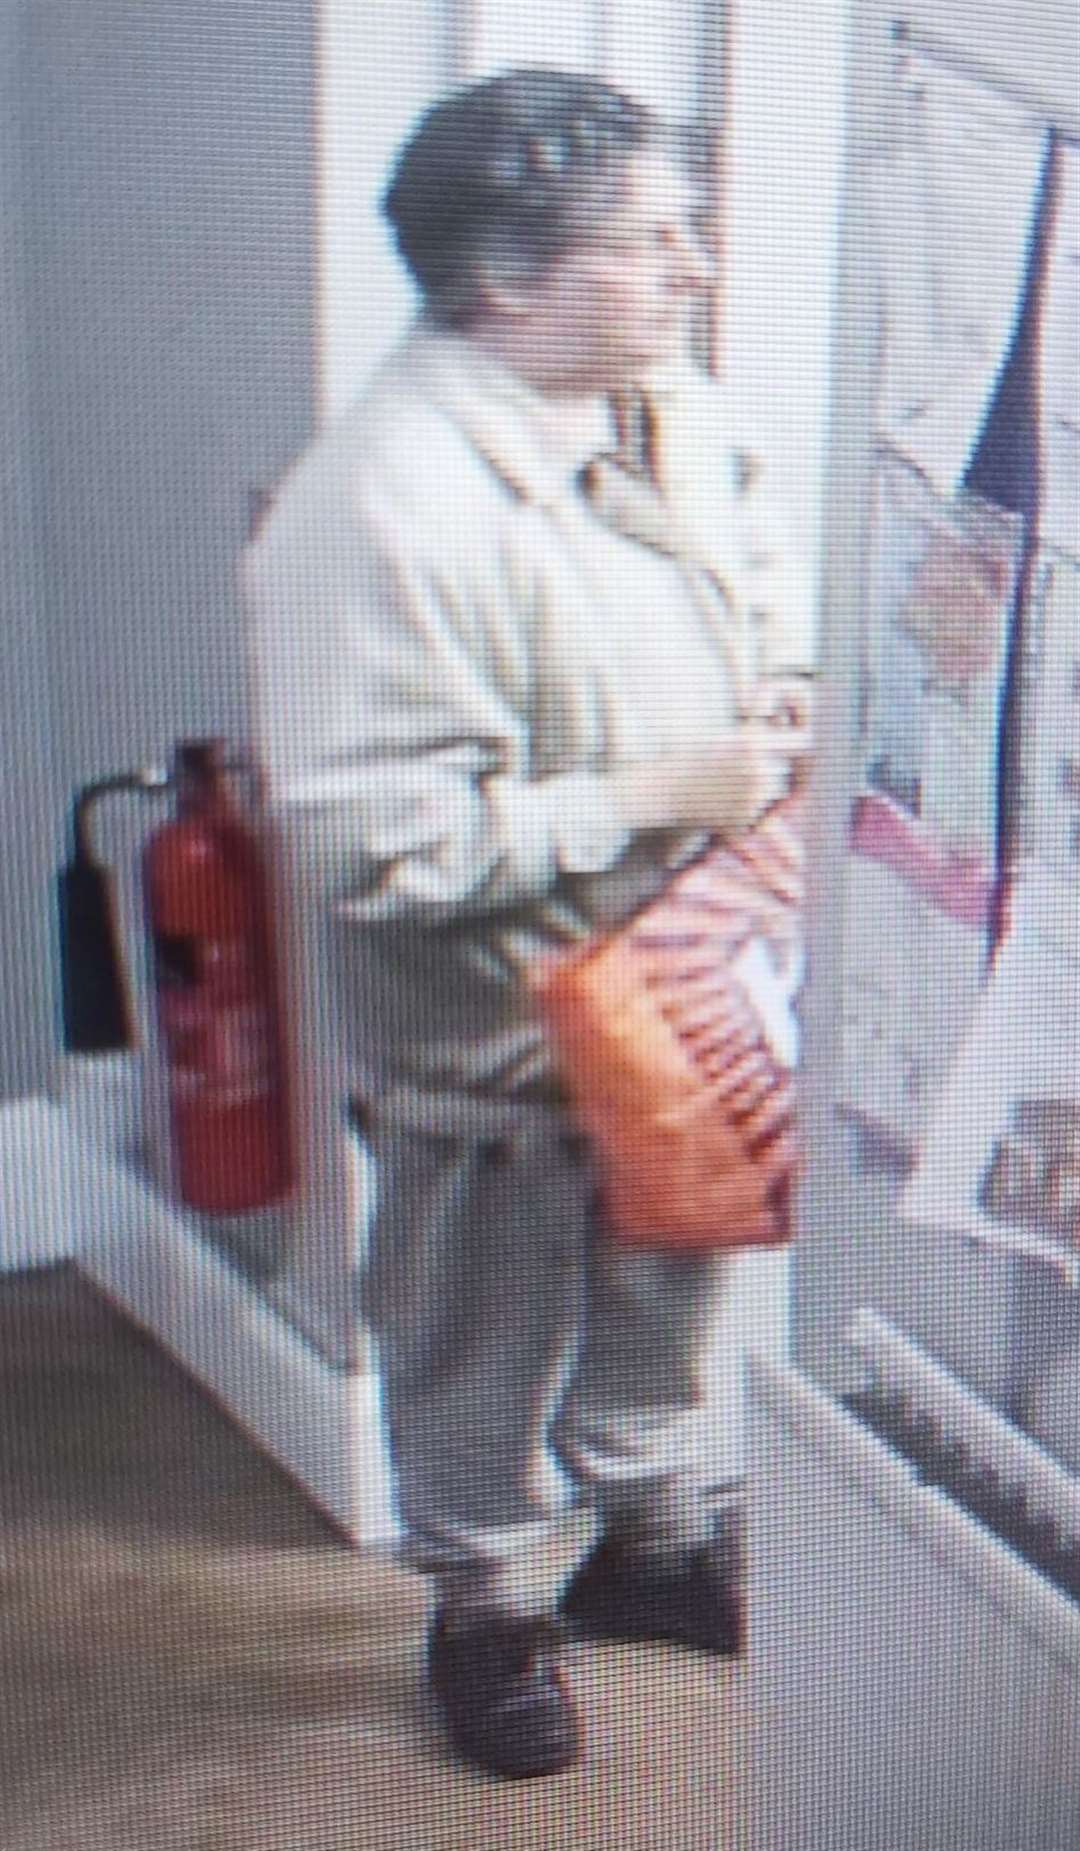 A CCTV image of Robin Hodges on the day he went missing